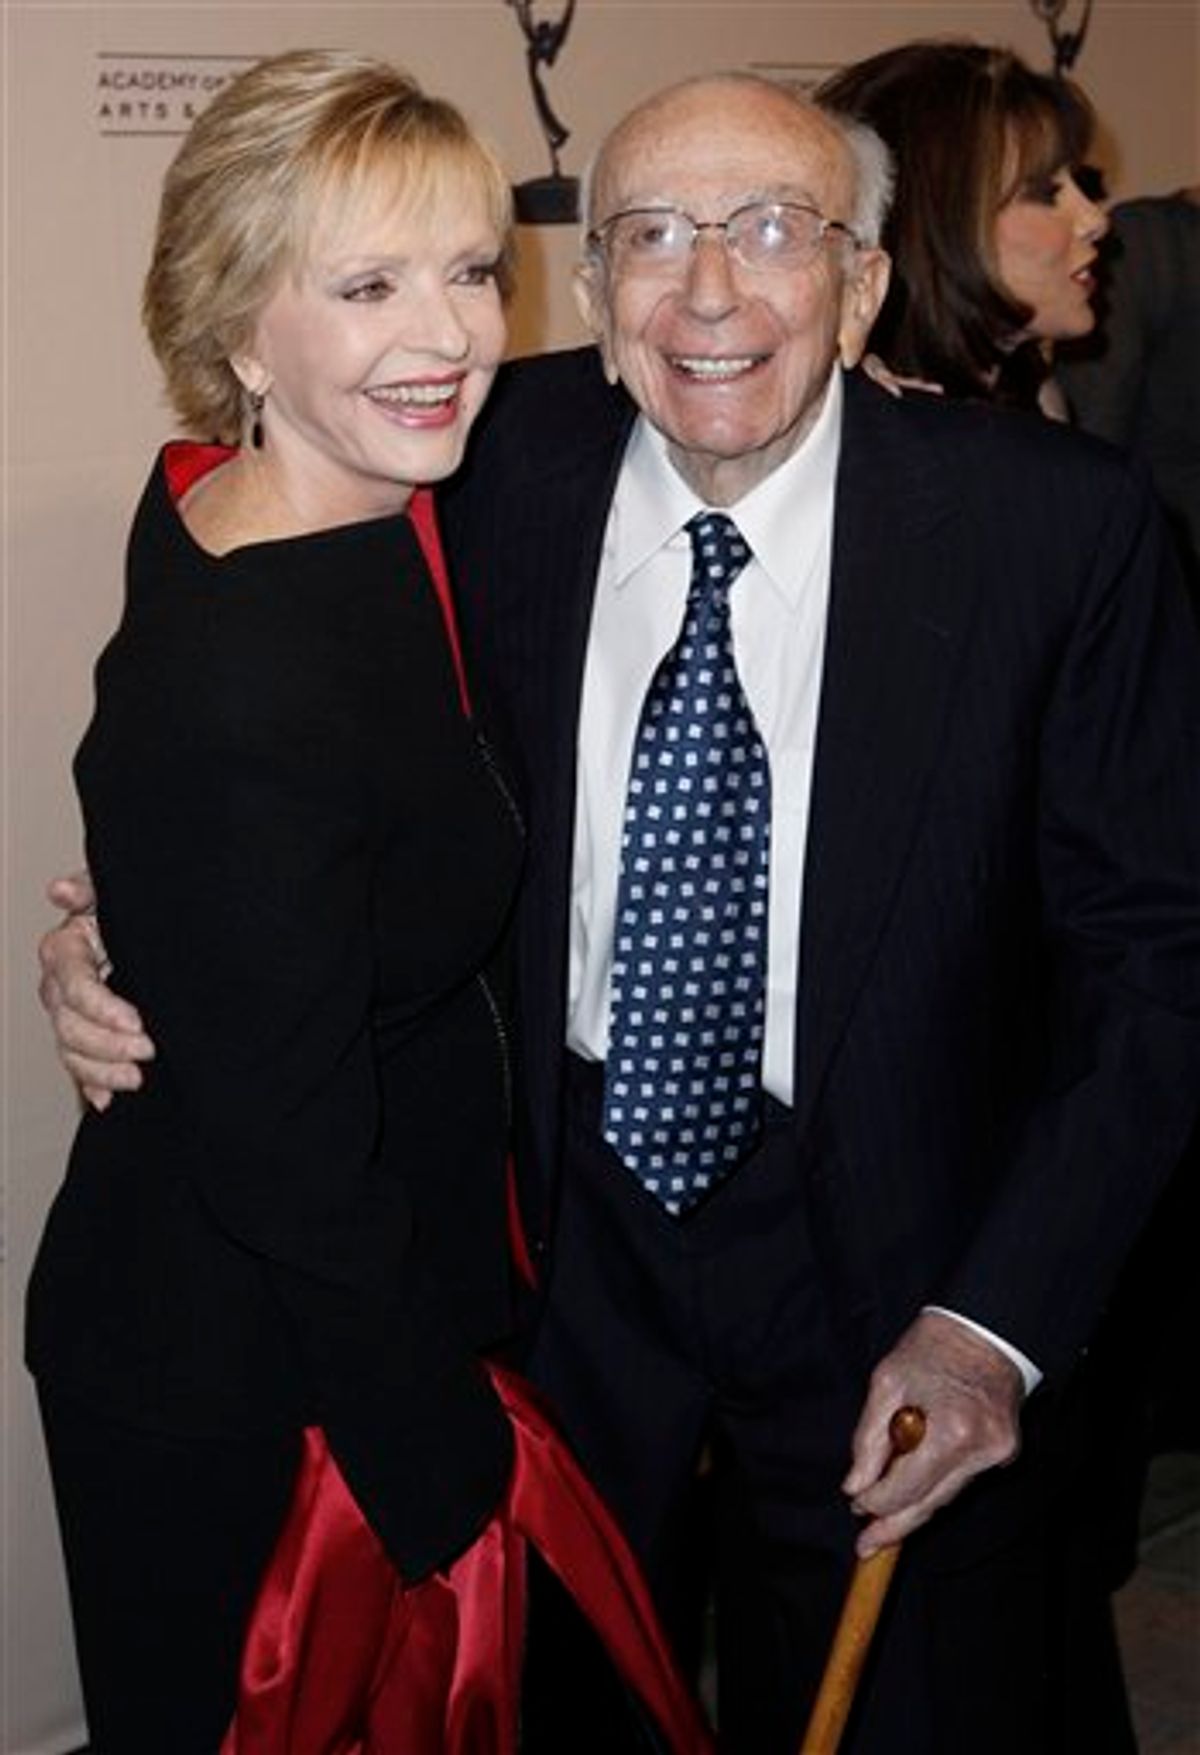 FILE - In this Dec. 9, 2008 file photo, Hall of Fame inductee Sherwood Schwartz, right, and actress Florence Henderson pose together at the Academy of Television Arts and Sciences 2008 Hall of Fame Ceremony in Beverly Hills, Calif. Schwartz, who created "Gilligan's Island" and "The Brady Bunch" died Tuesday, July 12, 2011. He was 94.  (AP Photo/Matt Sayles, file)  (AP)